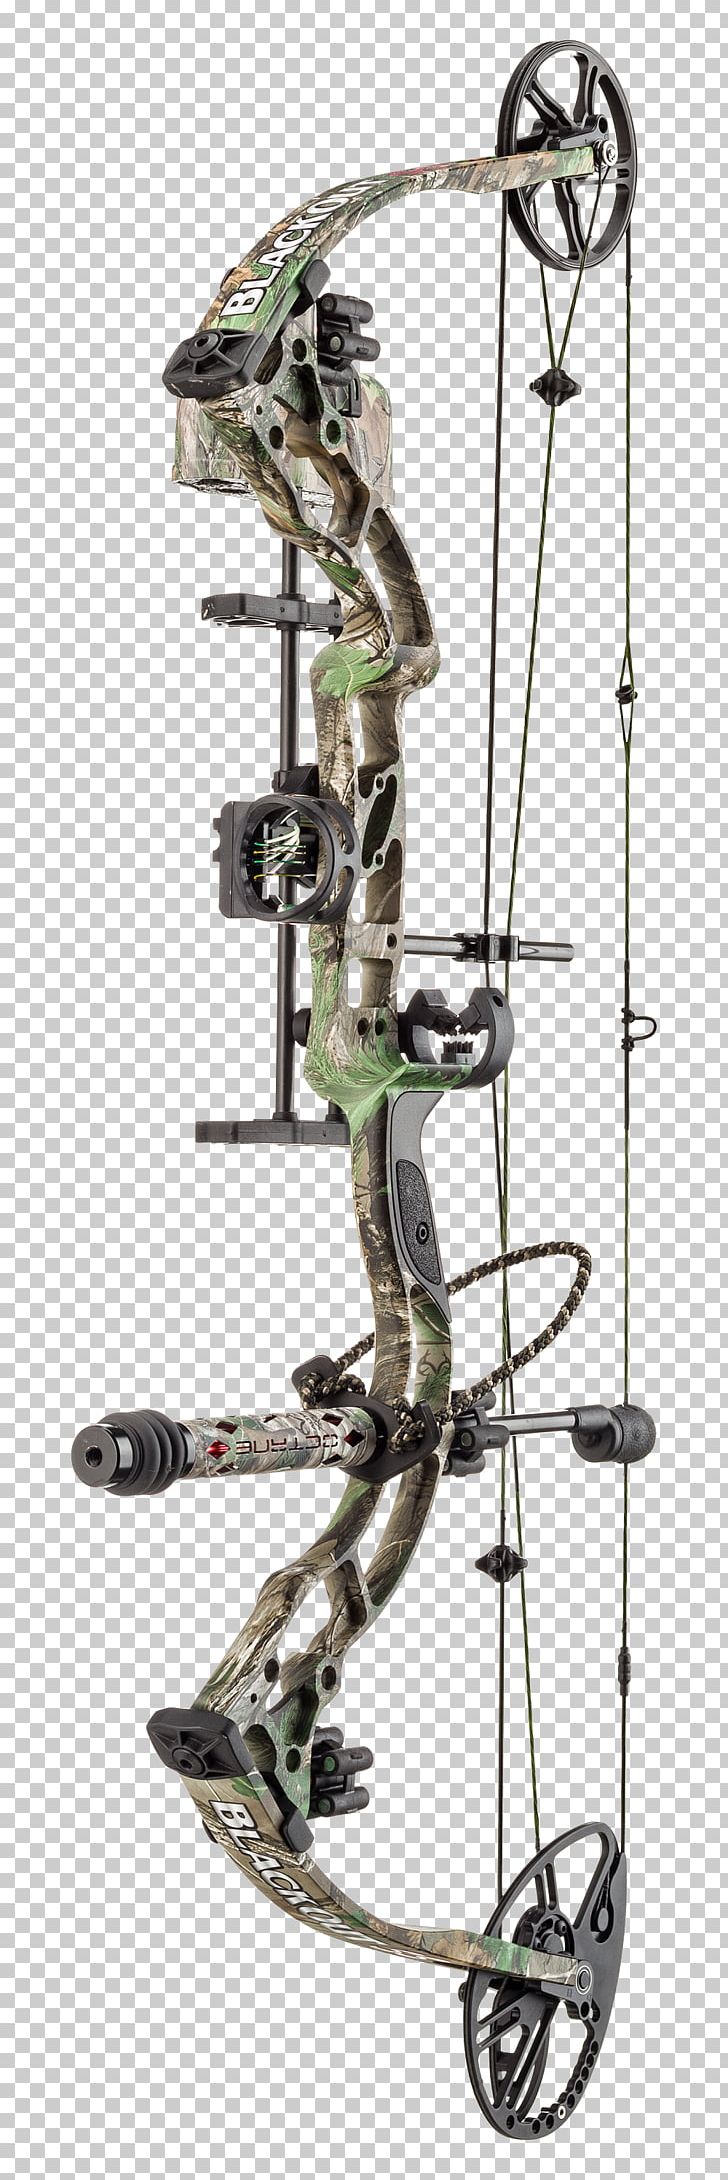 Compound Bows Bow And Arrow Bear Archery Bowhunting PNG, Clipart, Archery, Bear Archery, Bow, Bow And Arrow, Bowhunters Superstore Free PNG Download